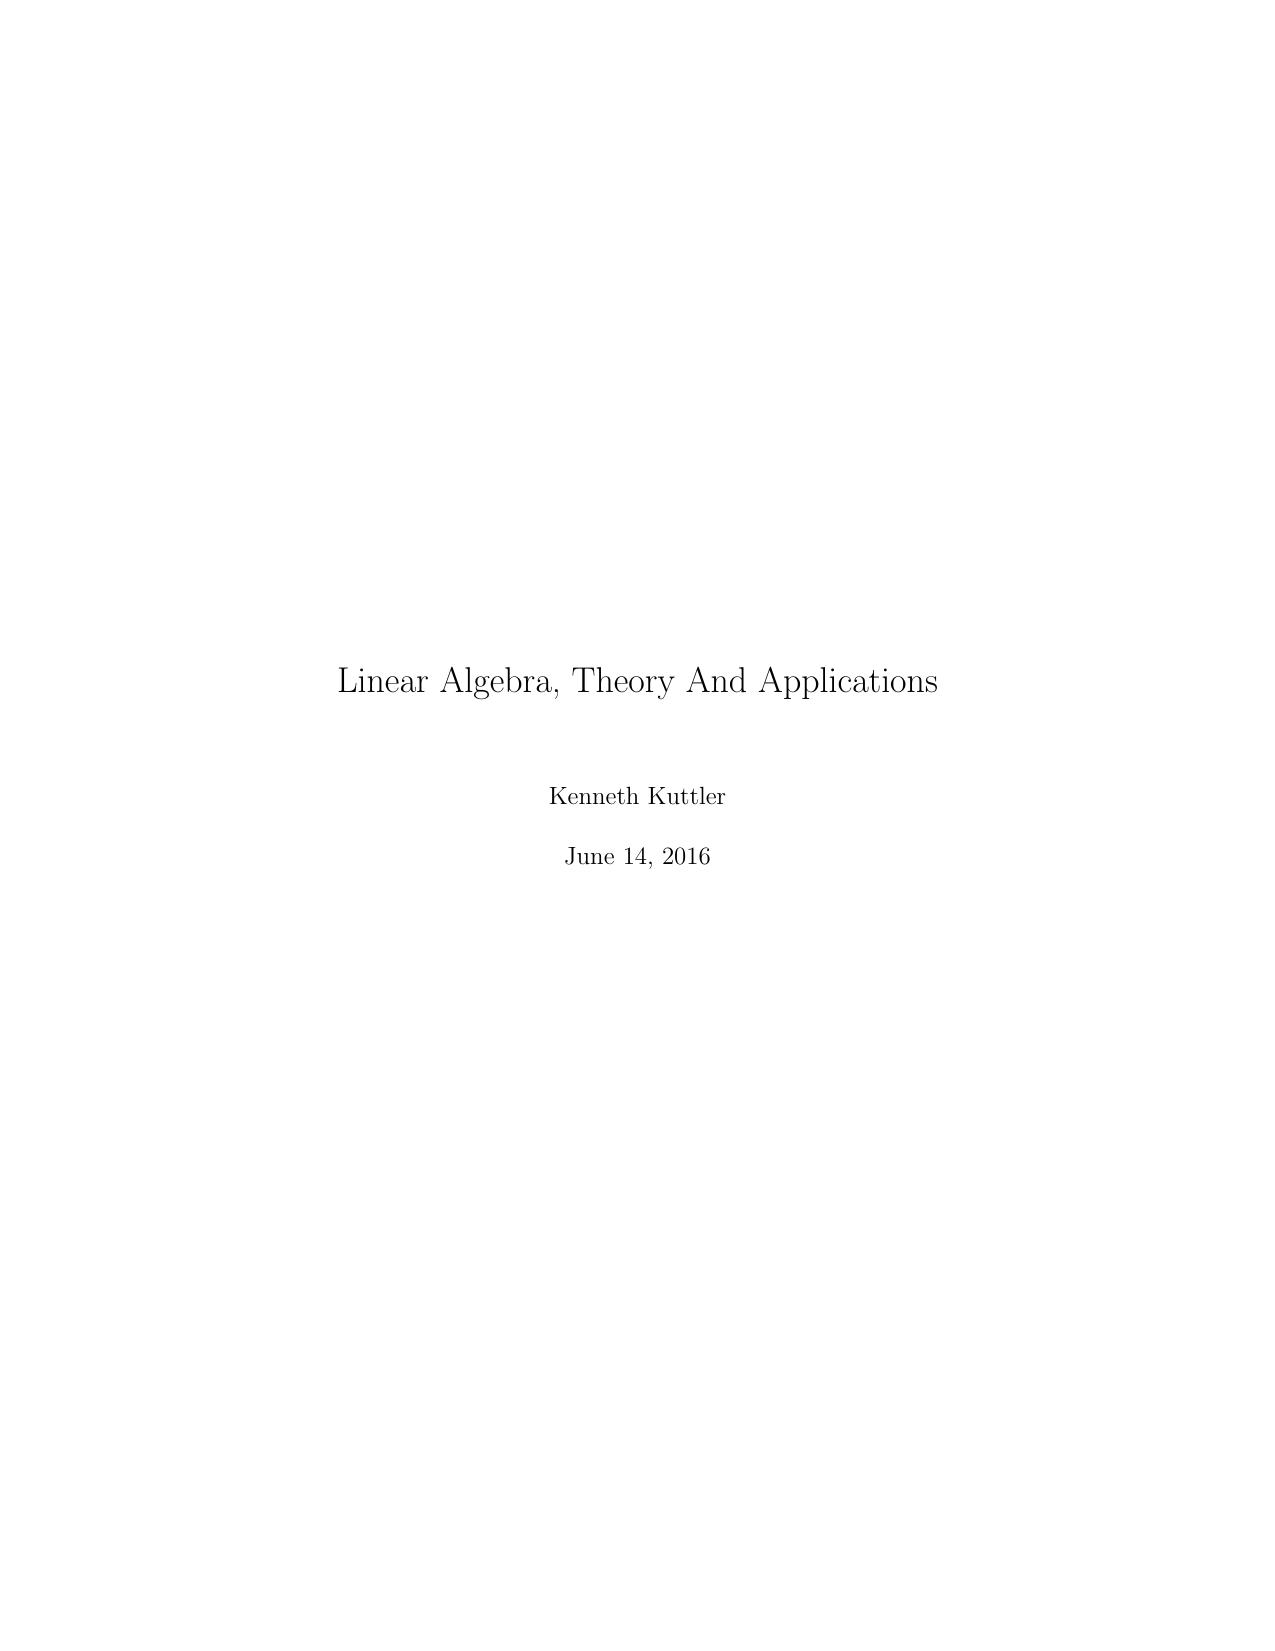 Linear Algebra, Theory And Applications 2016